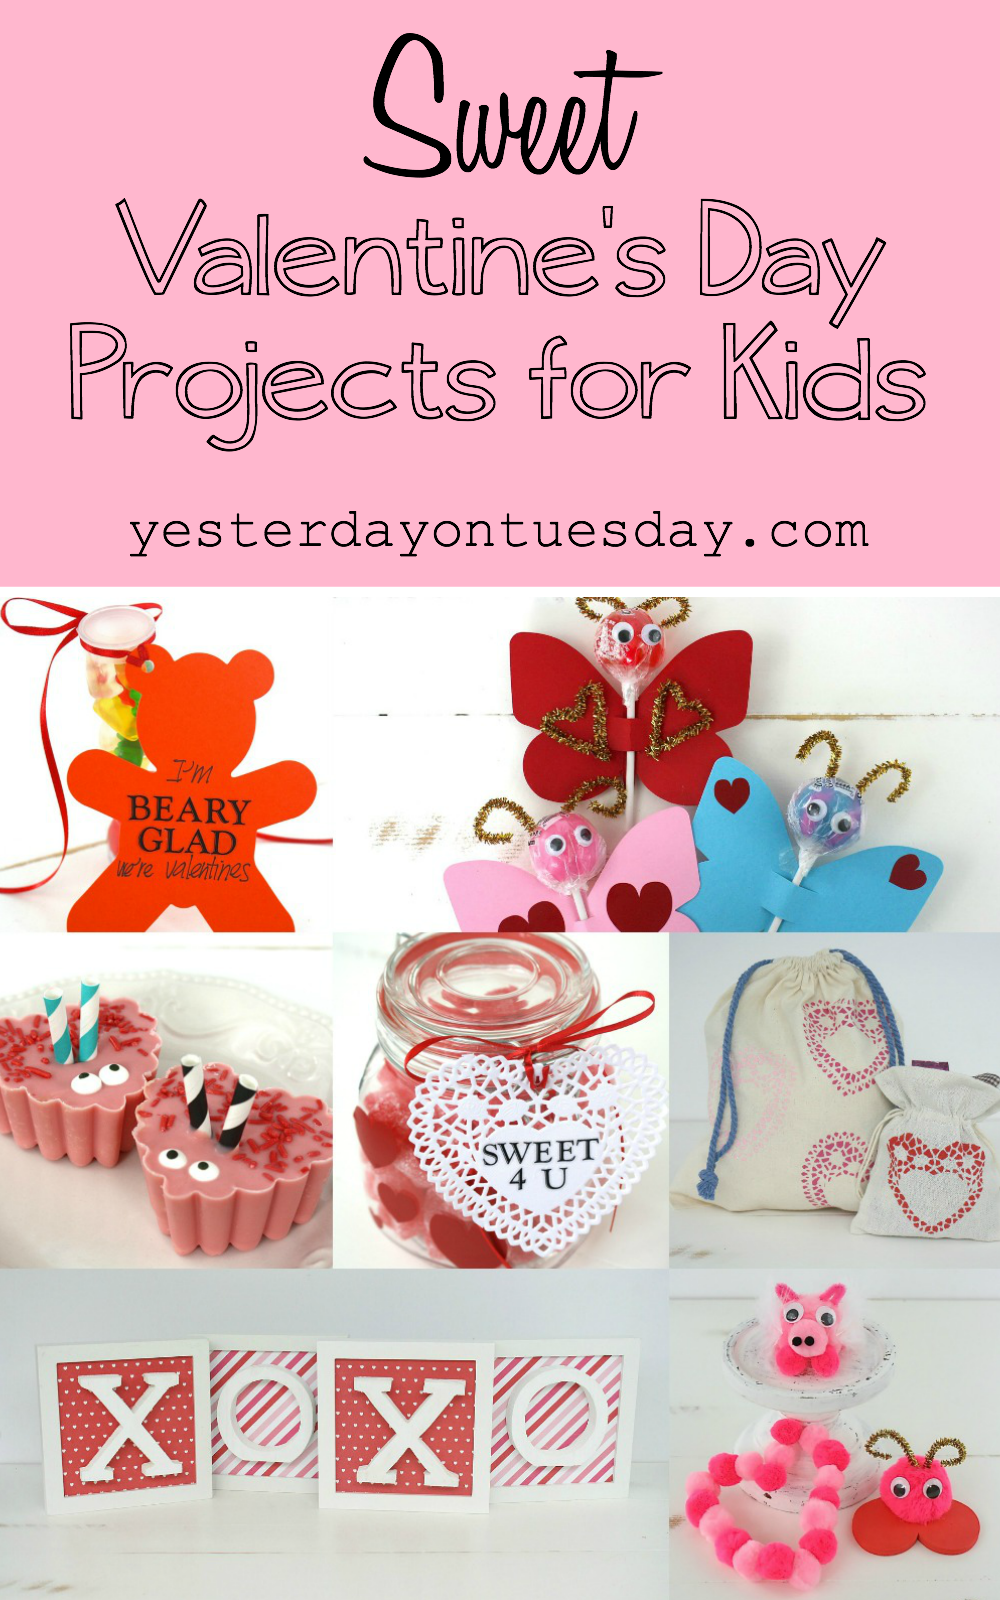 Sweet Valentine’s Day Projects for Kids